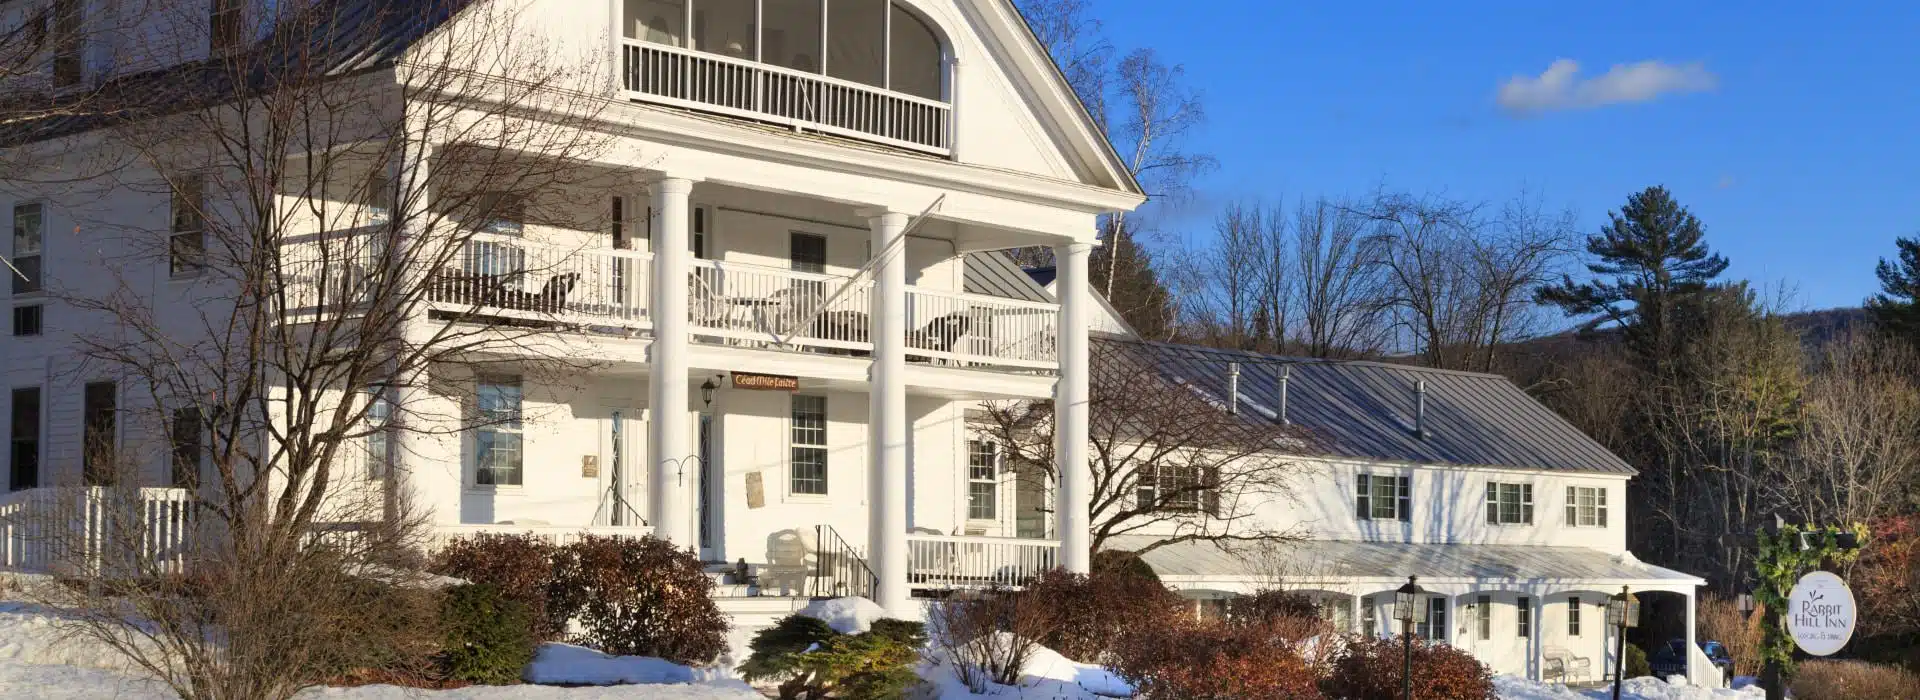 Exterior view of the property painted white with front porch and second level porch all surrounded by snow and winter-looking trees and shrubs with blue clouds in the sky